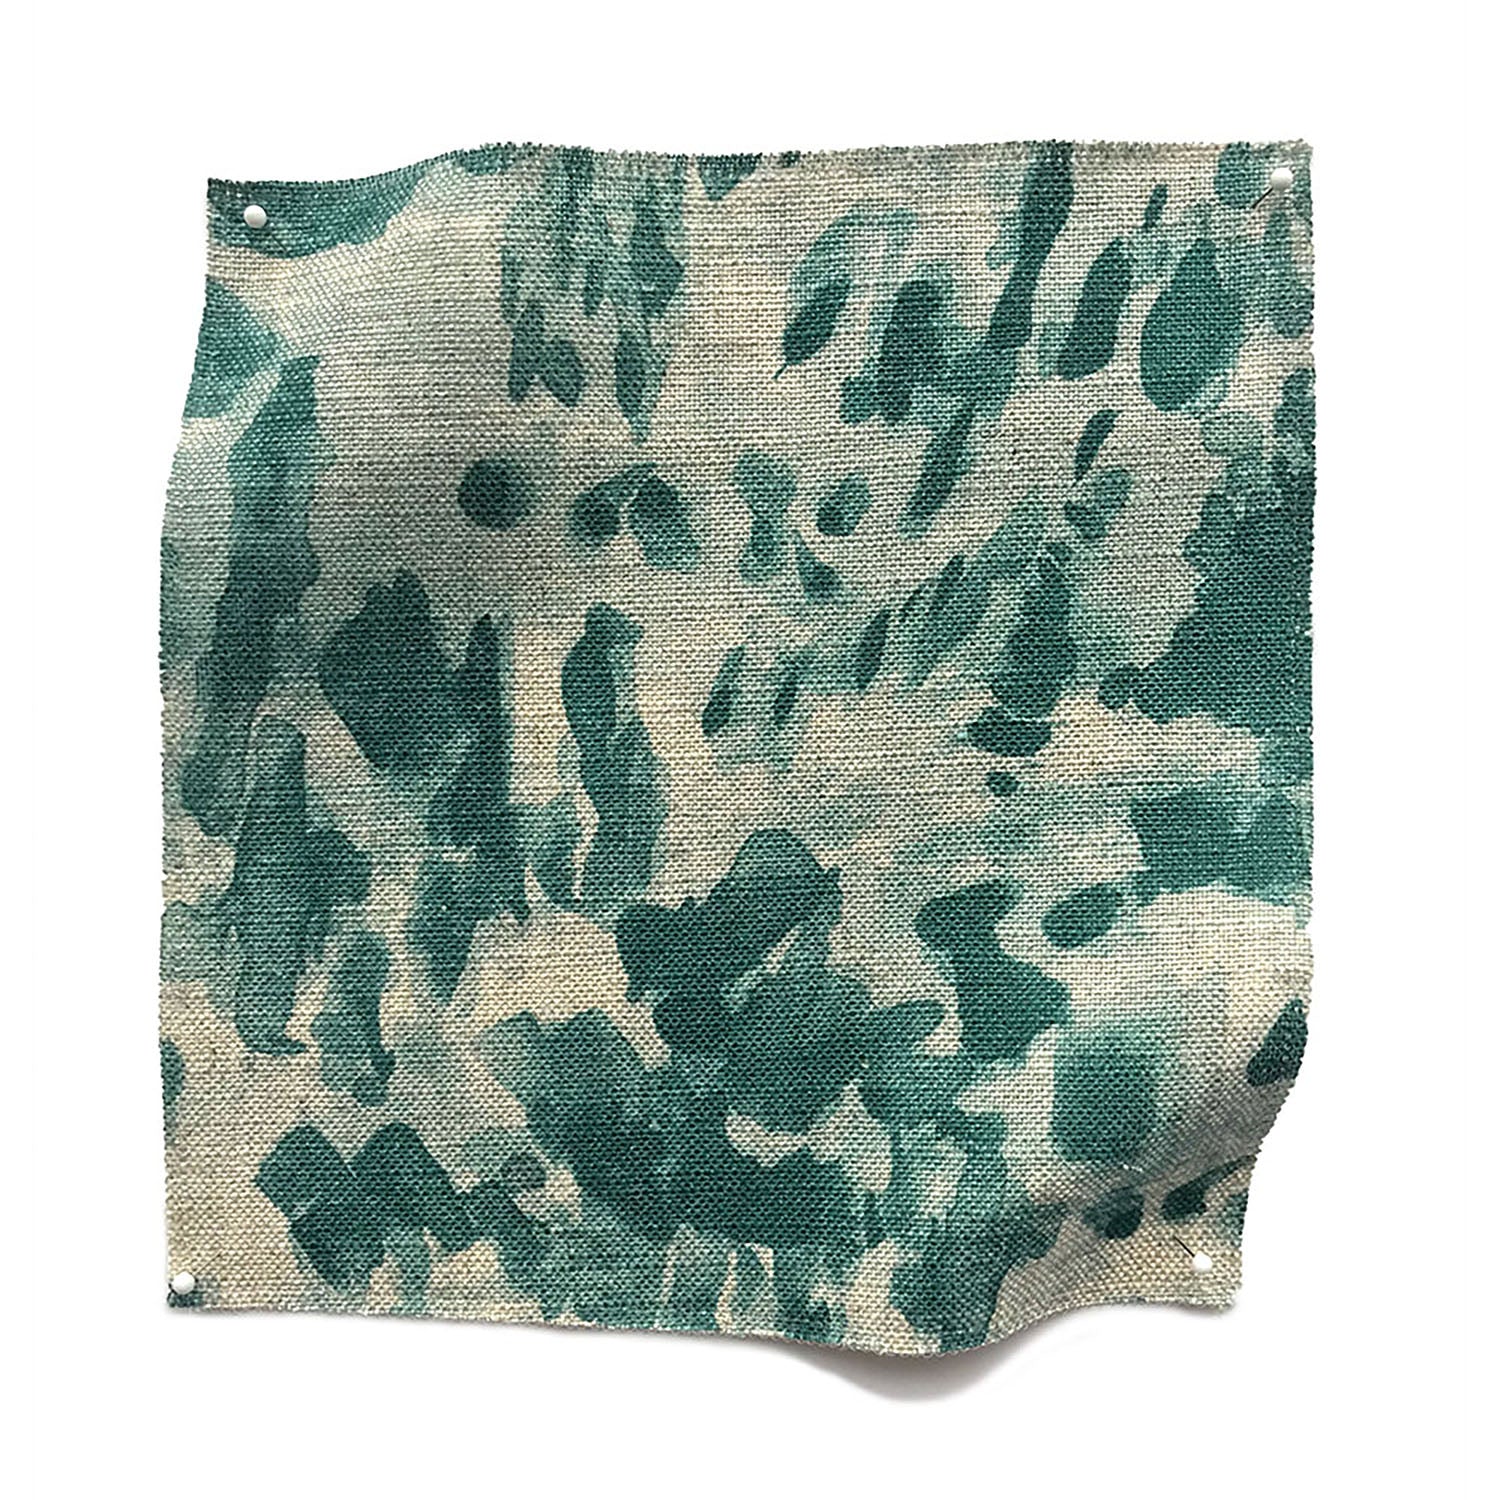 Square fabric swatch in a painterly cloud print in shades of turquoise on a cream field.